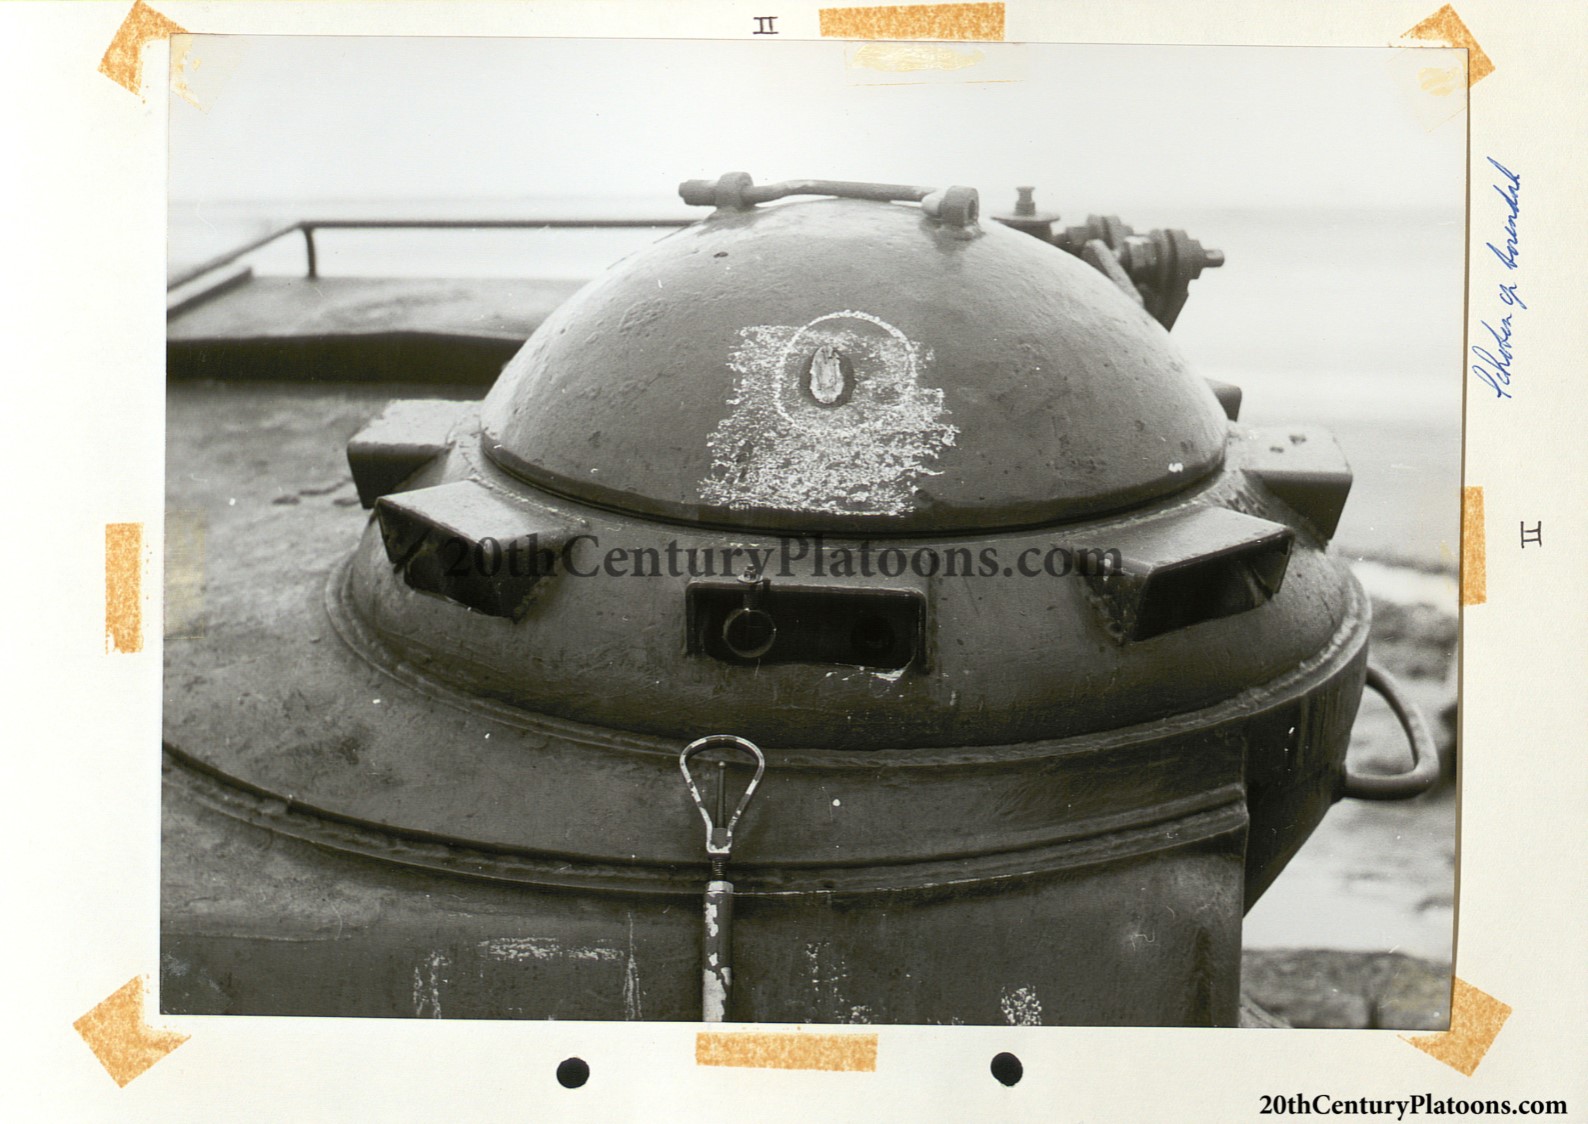 <i>“Schoten op torendak”</i><br>Rounds fired at the turret roof.